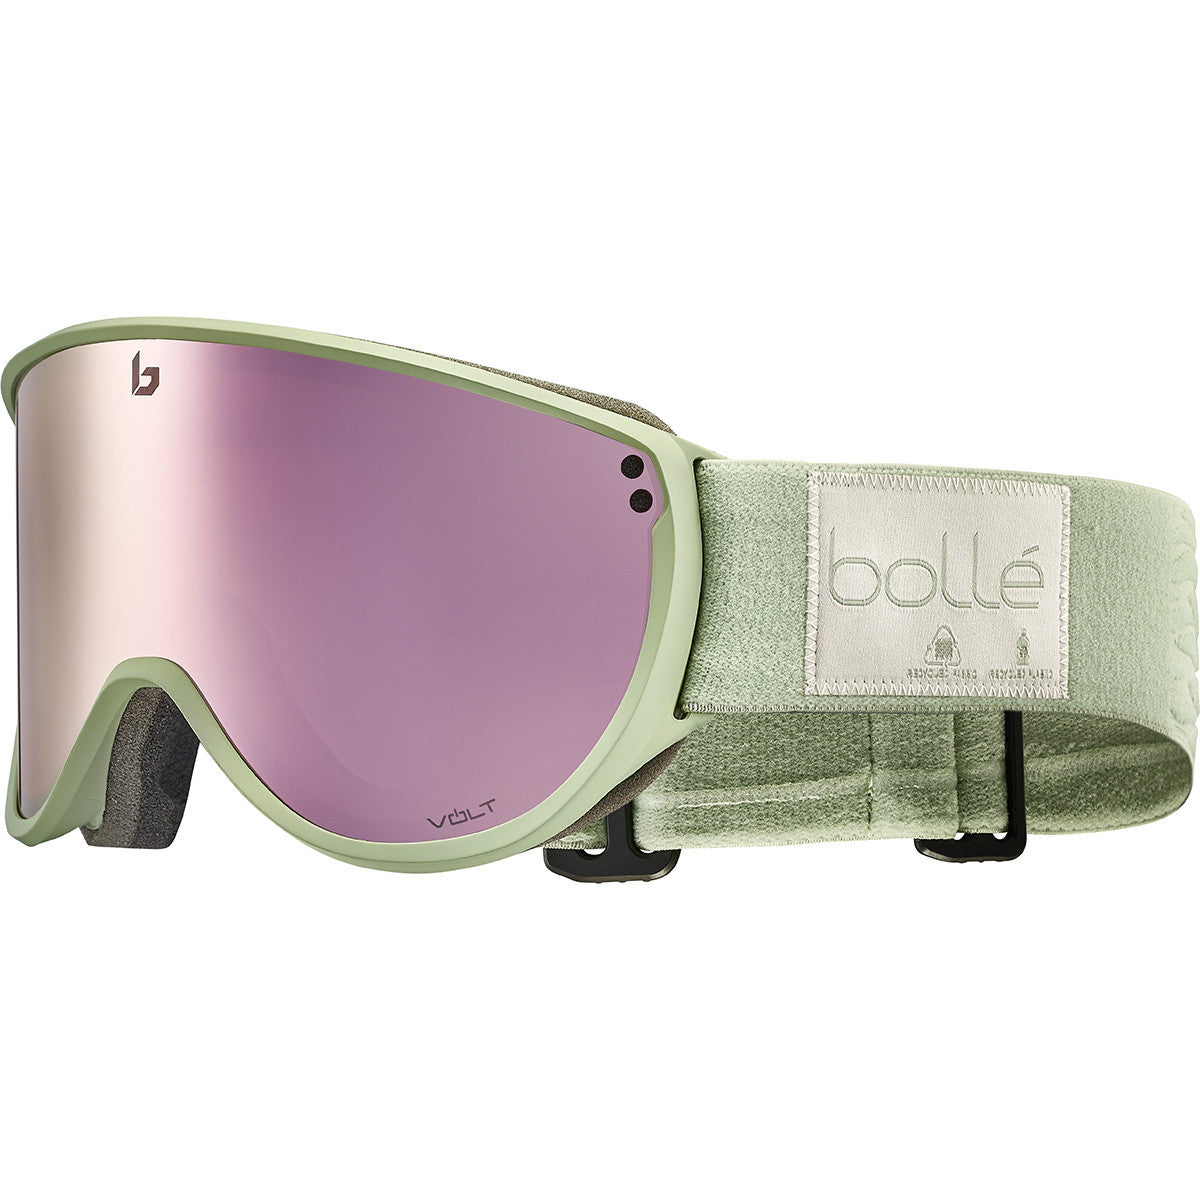 Bolle Eco Blanca Goggles  Matcha Matte Small One size